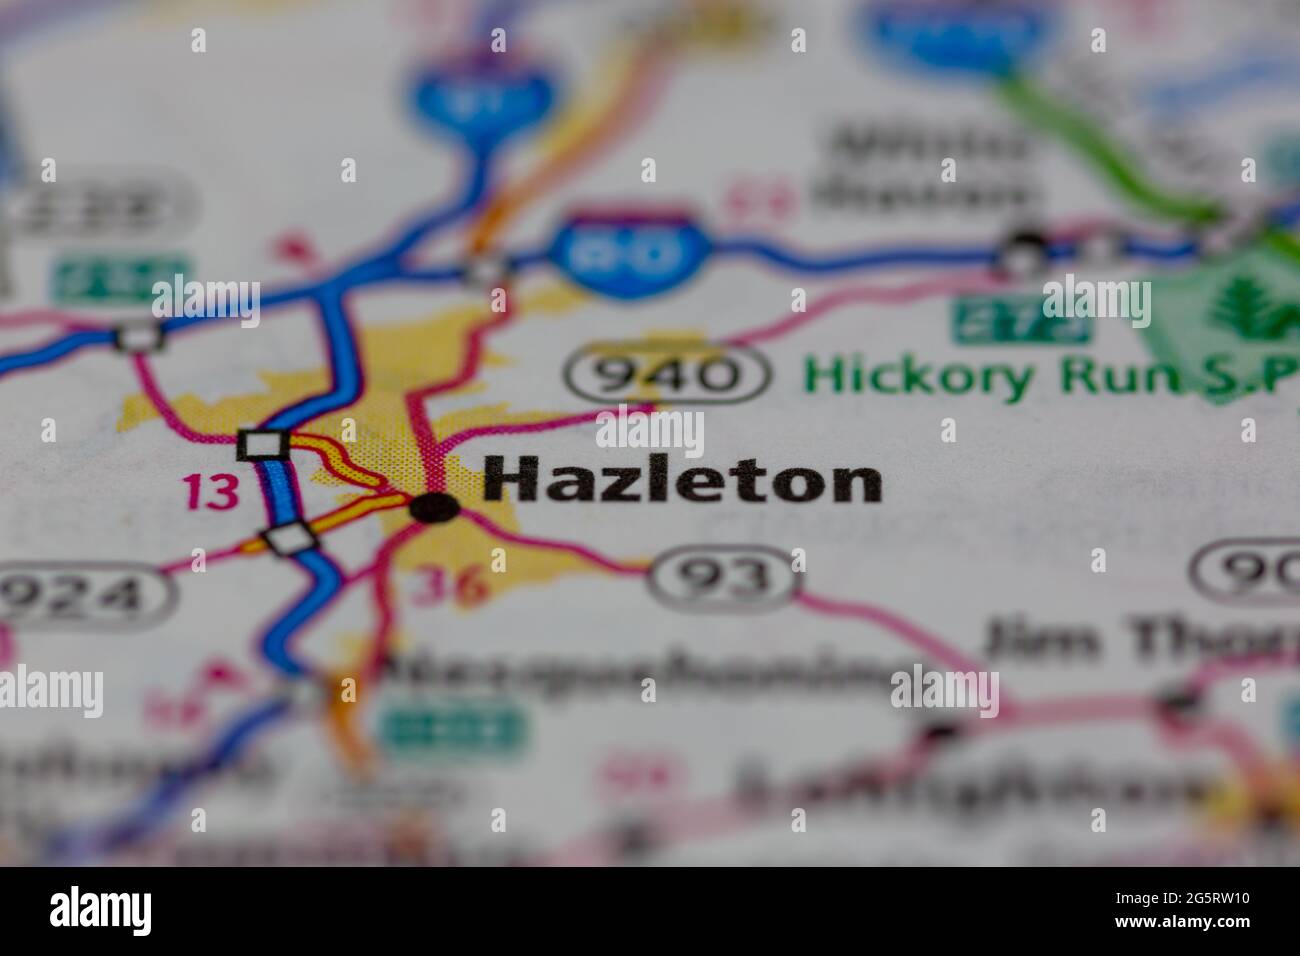 Hazleton Pennsylvania USA shown on a Geography map or Road map Stock Photo